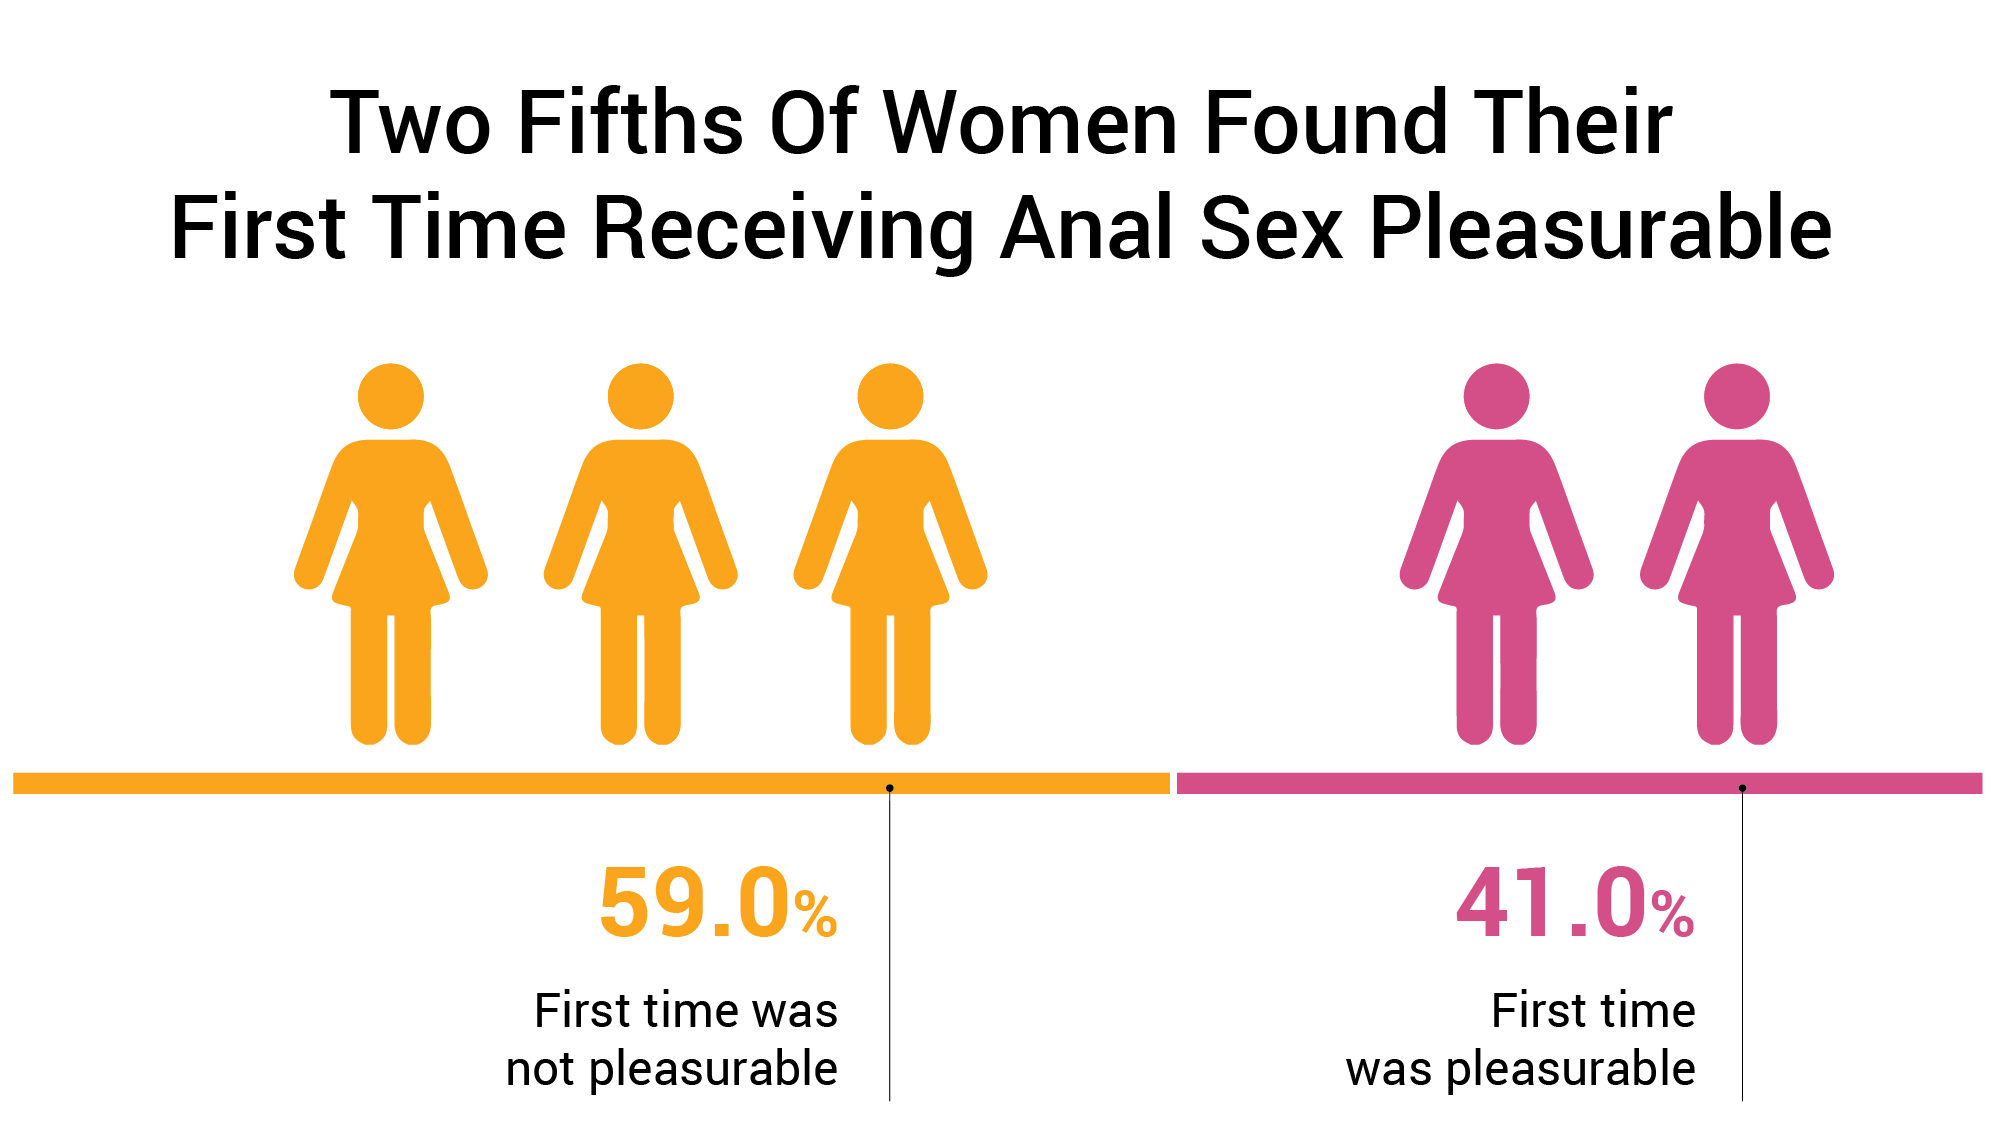 41 percent of women found their first time receiving anal sex pleasurable